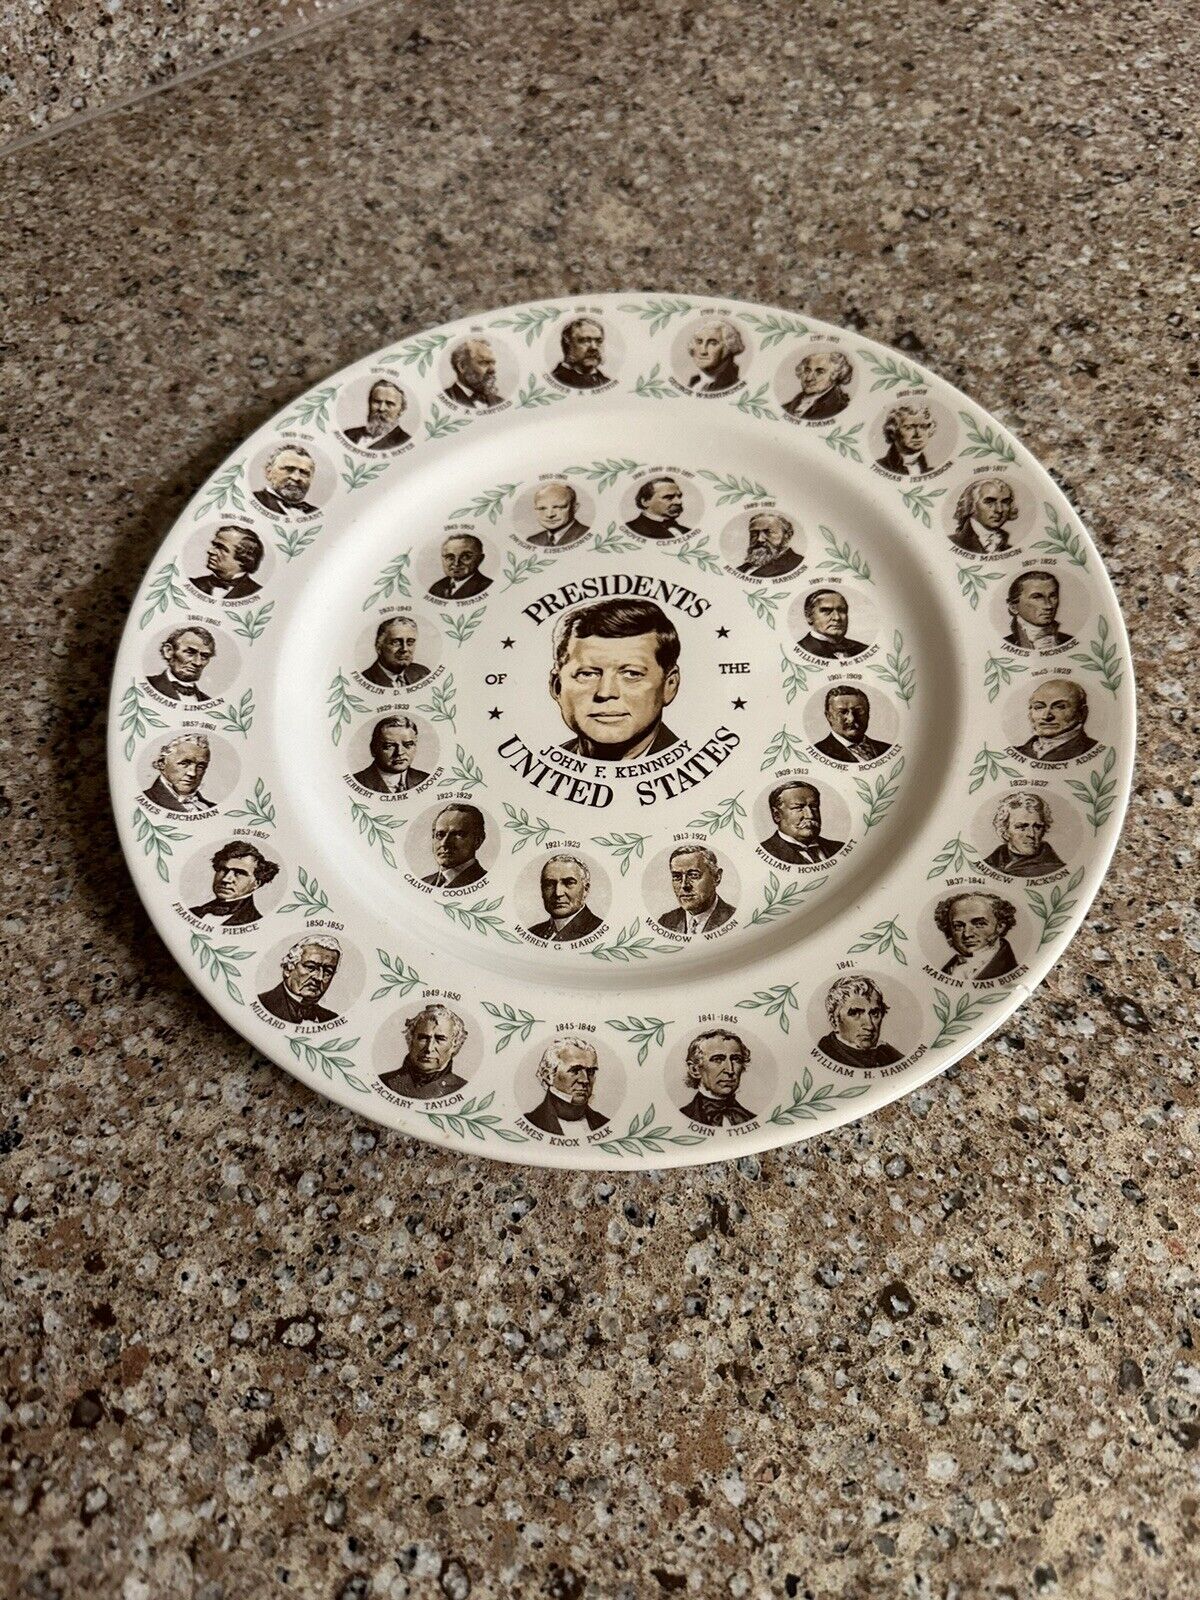 Presidents Of The United States Collector Plate Vintage 1960s John F Kennedy JFK